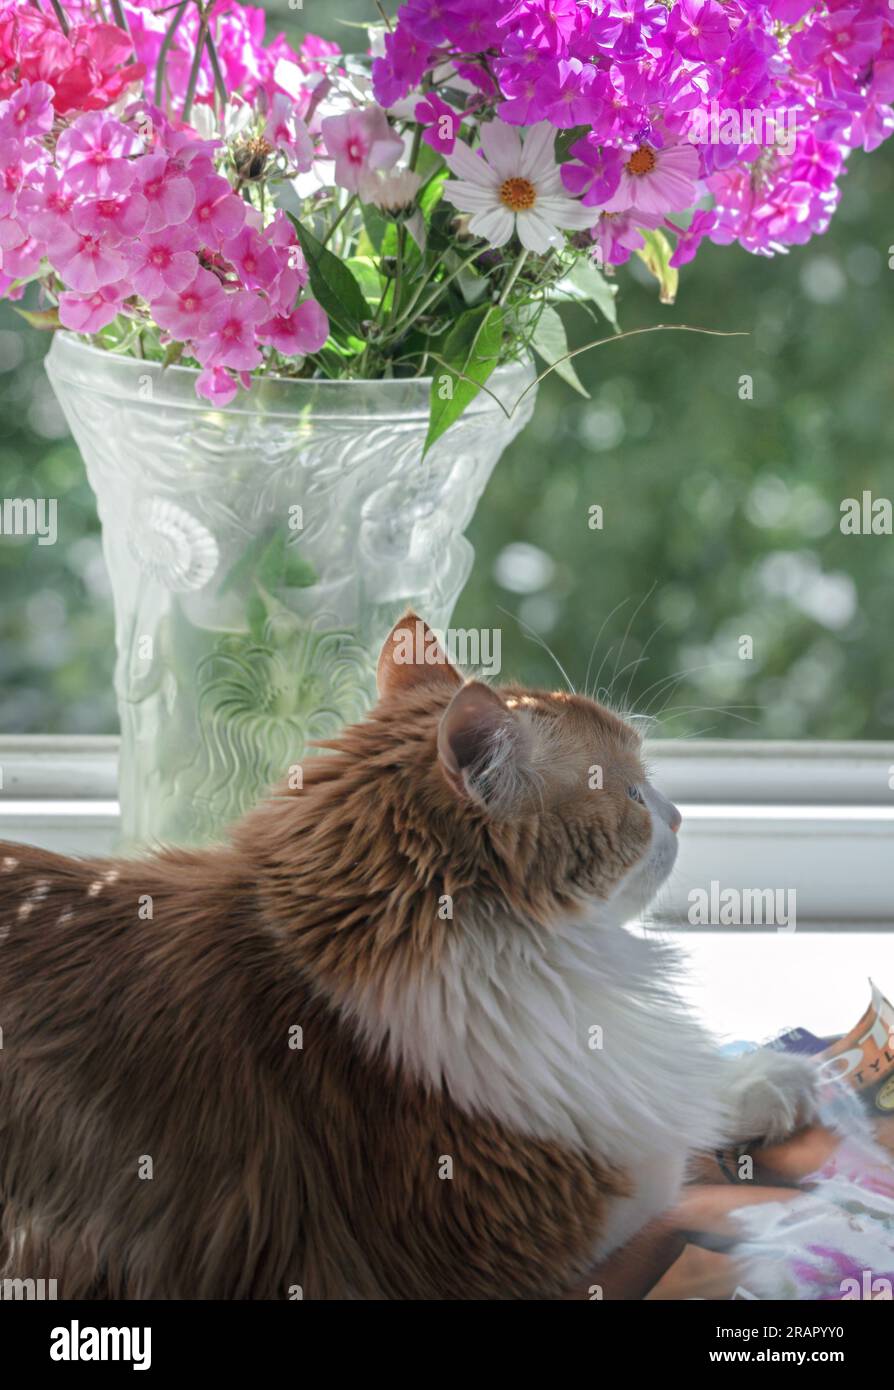 Real pretty adult ginger cat and beauty pink phlox flowers in vase Stock Photo